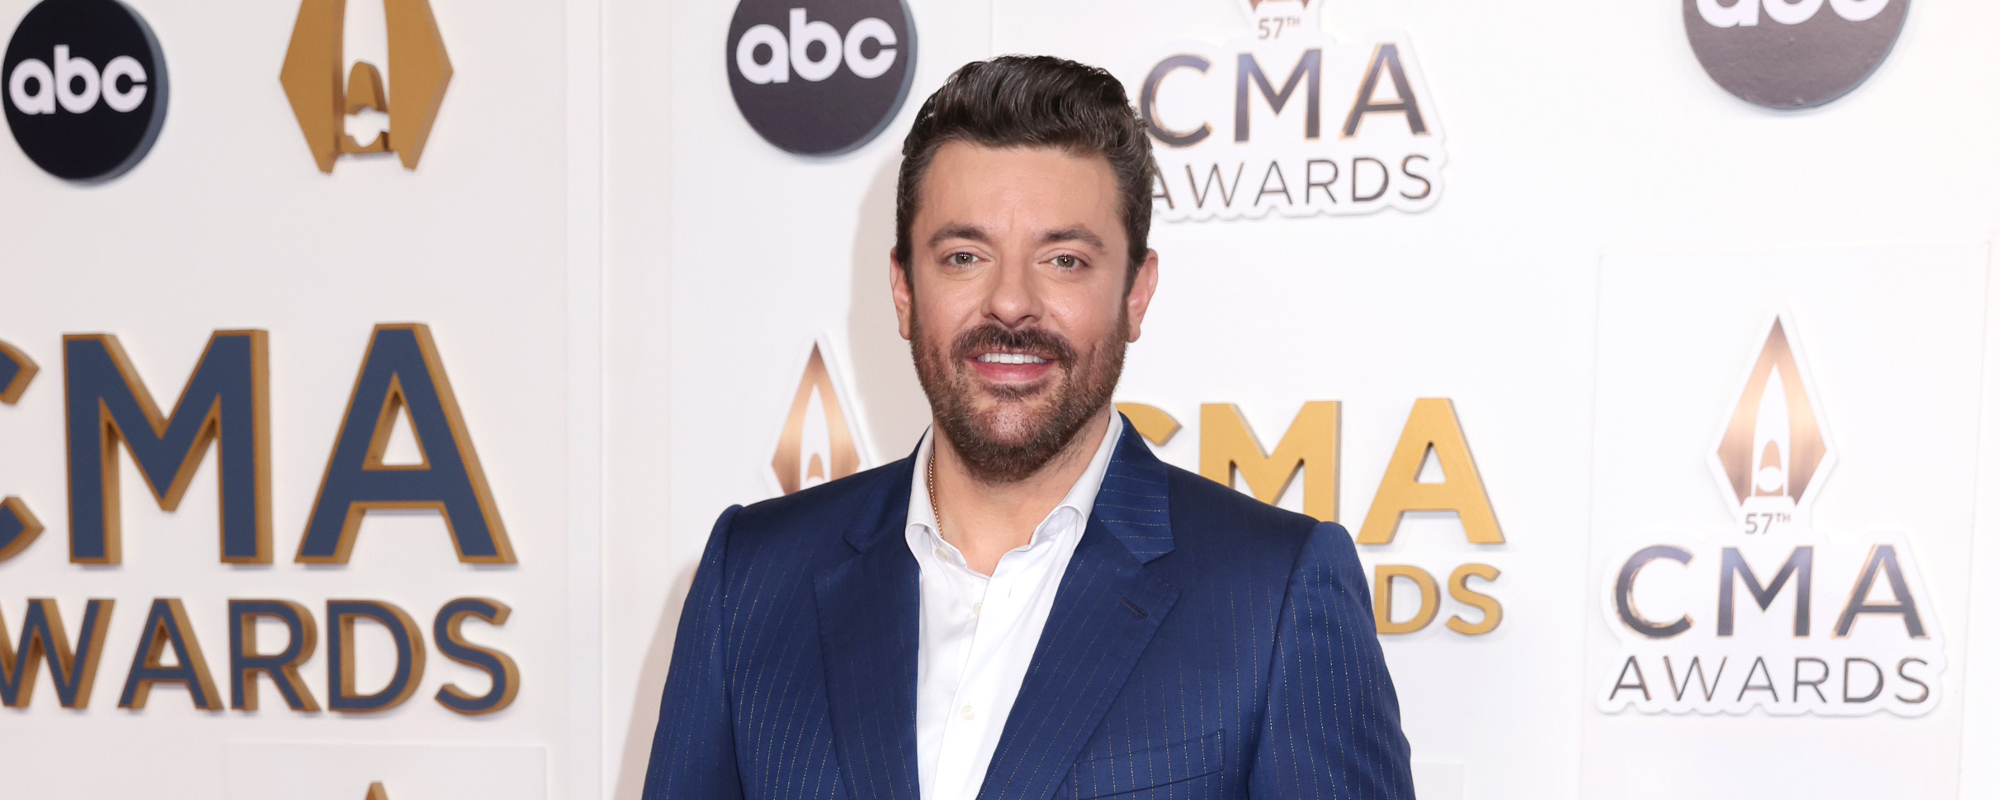 Chris Young Shares “Confidential” News About New Album in Mysteriously Redacted Video